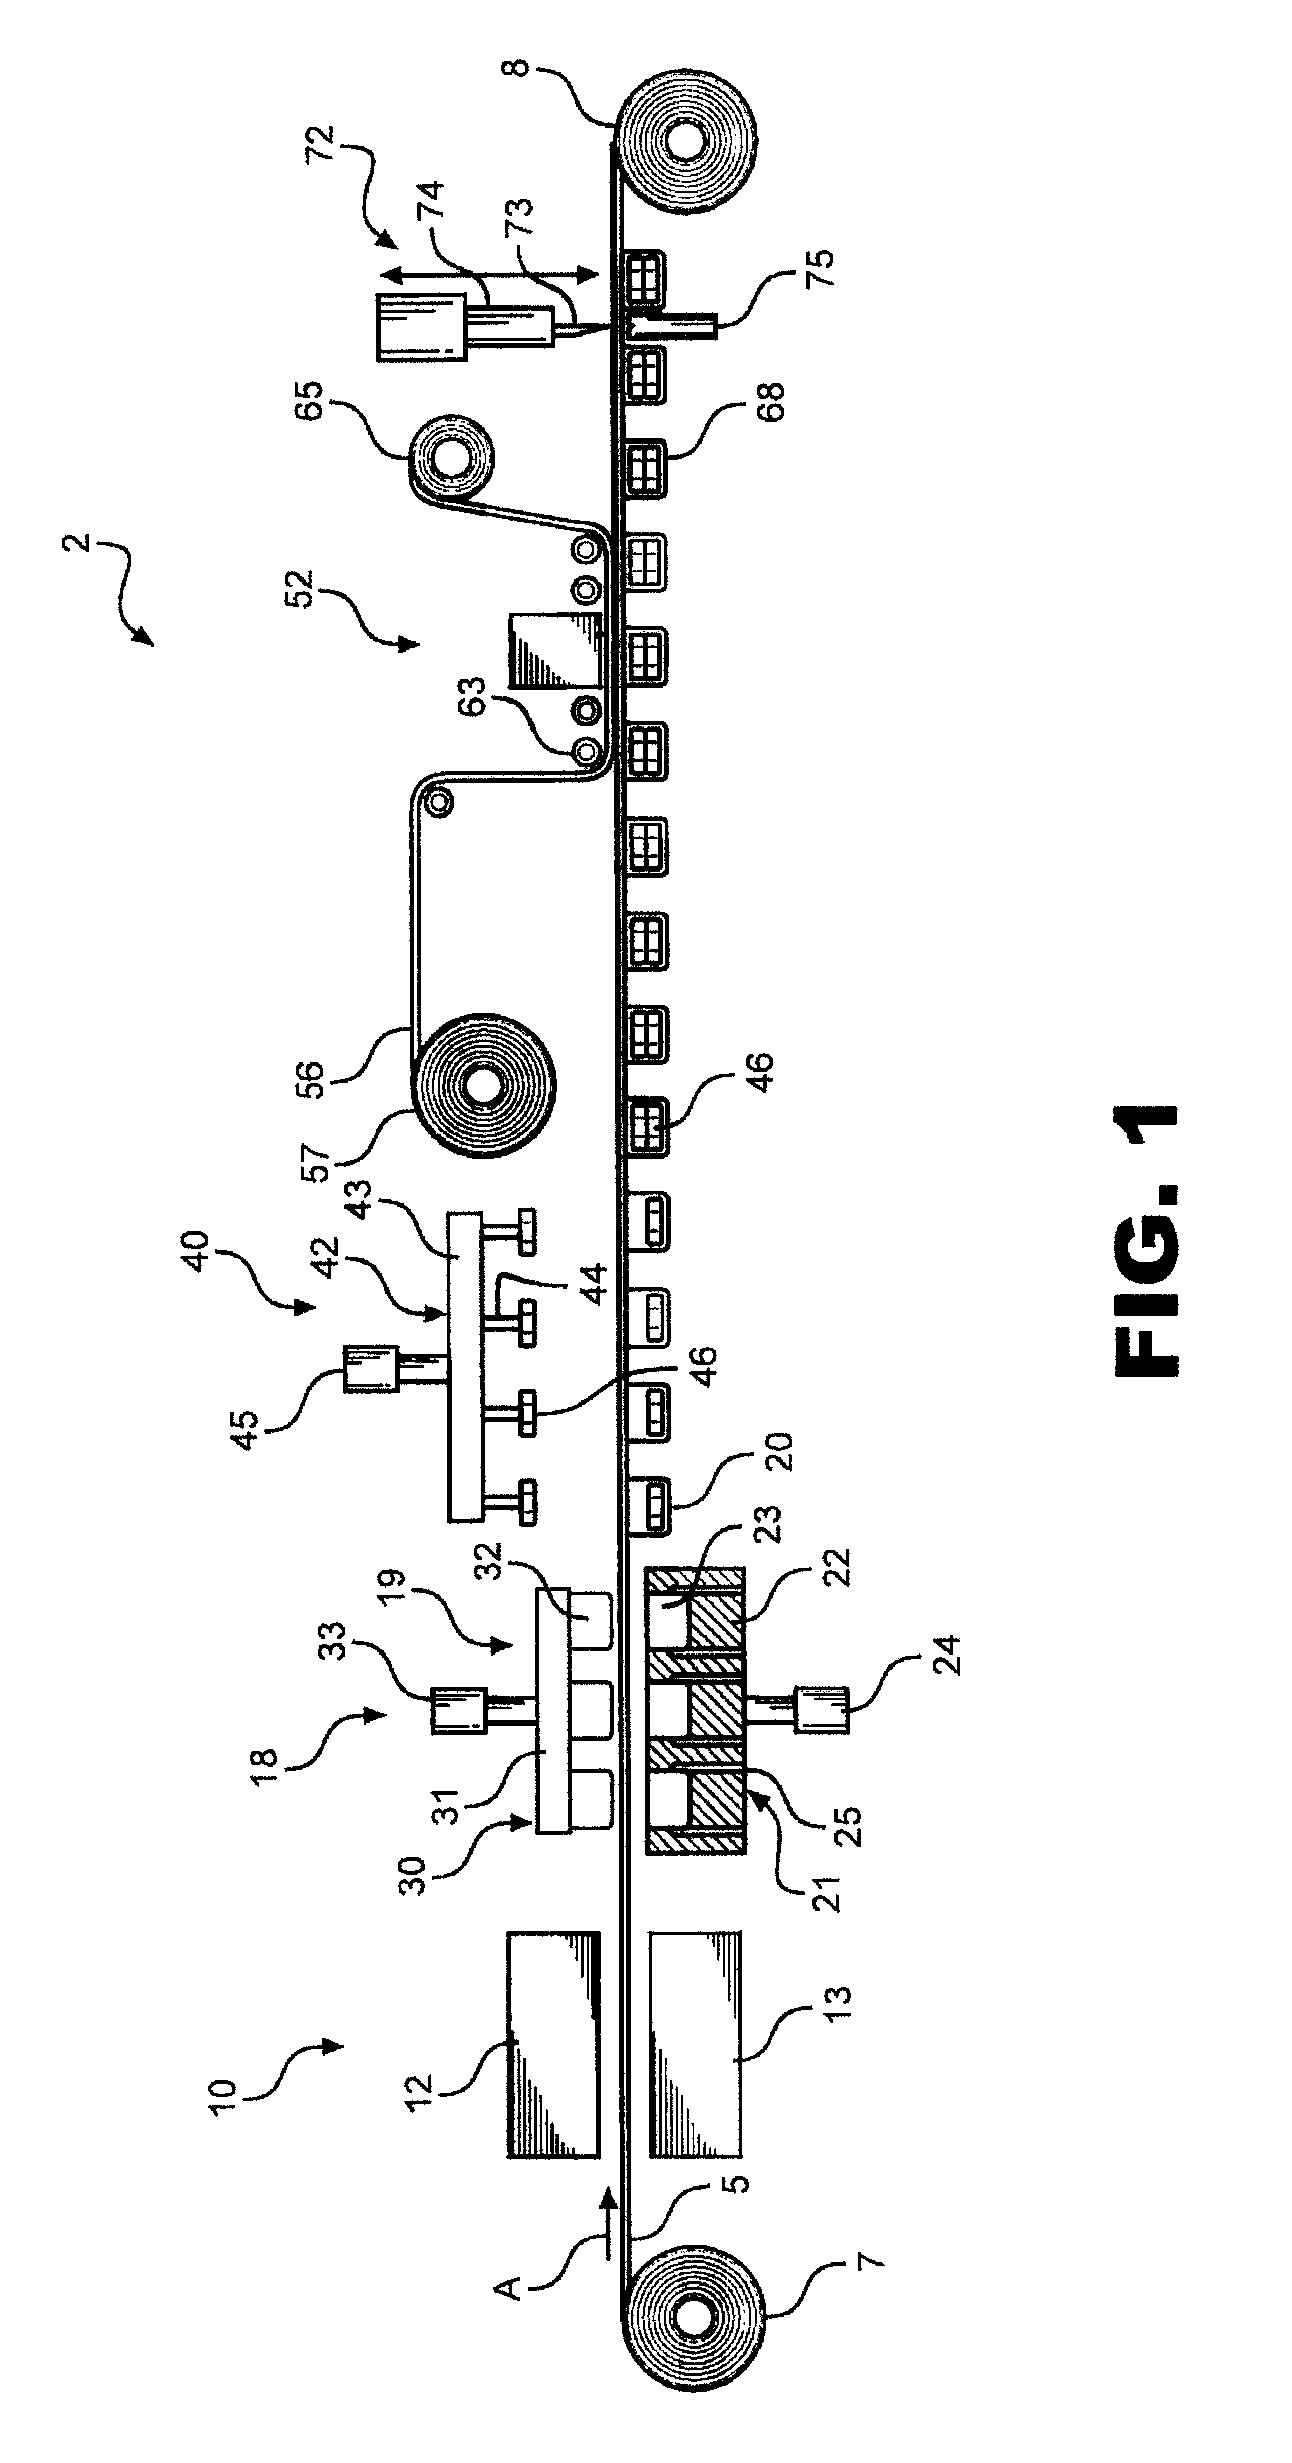 Hffs packaging method and apparatus for refrigerated dough